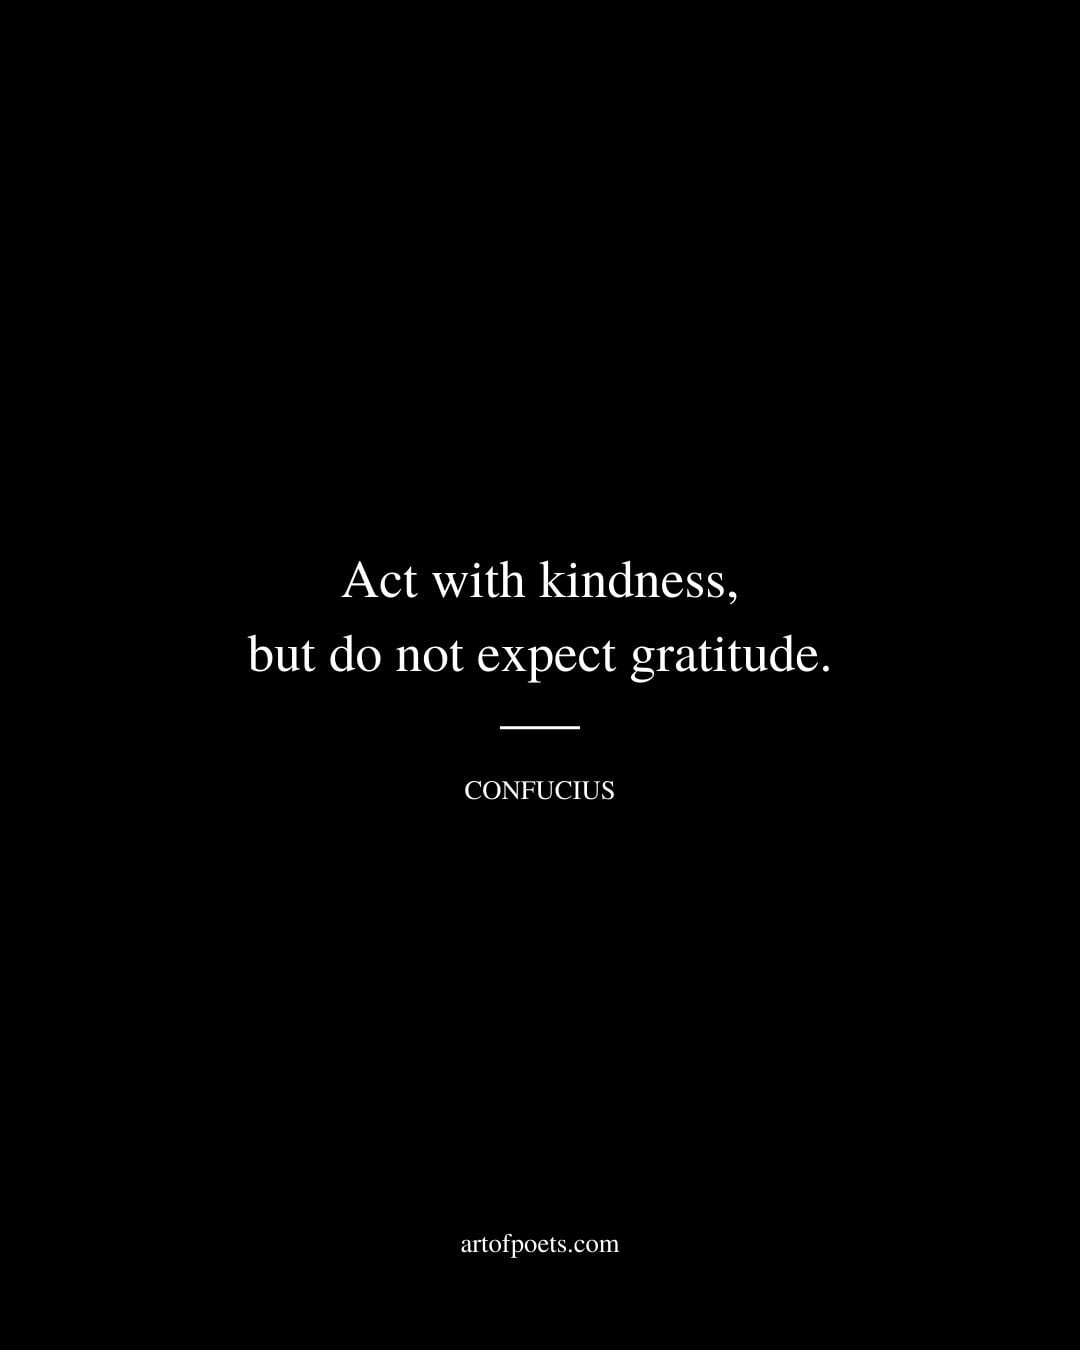 Act with kindness but do not expect gratitude